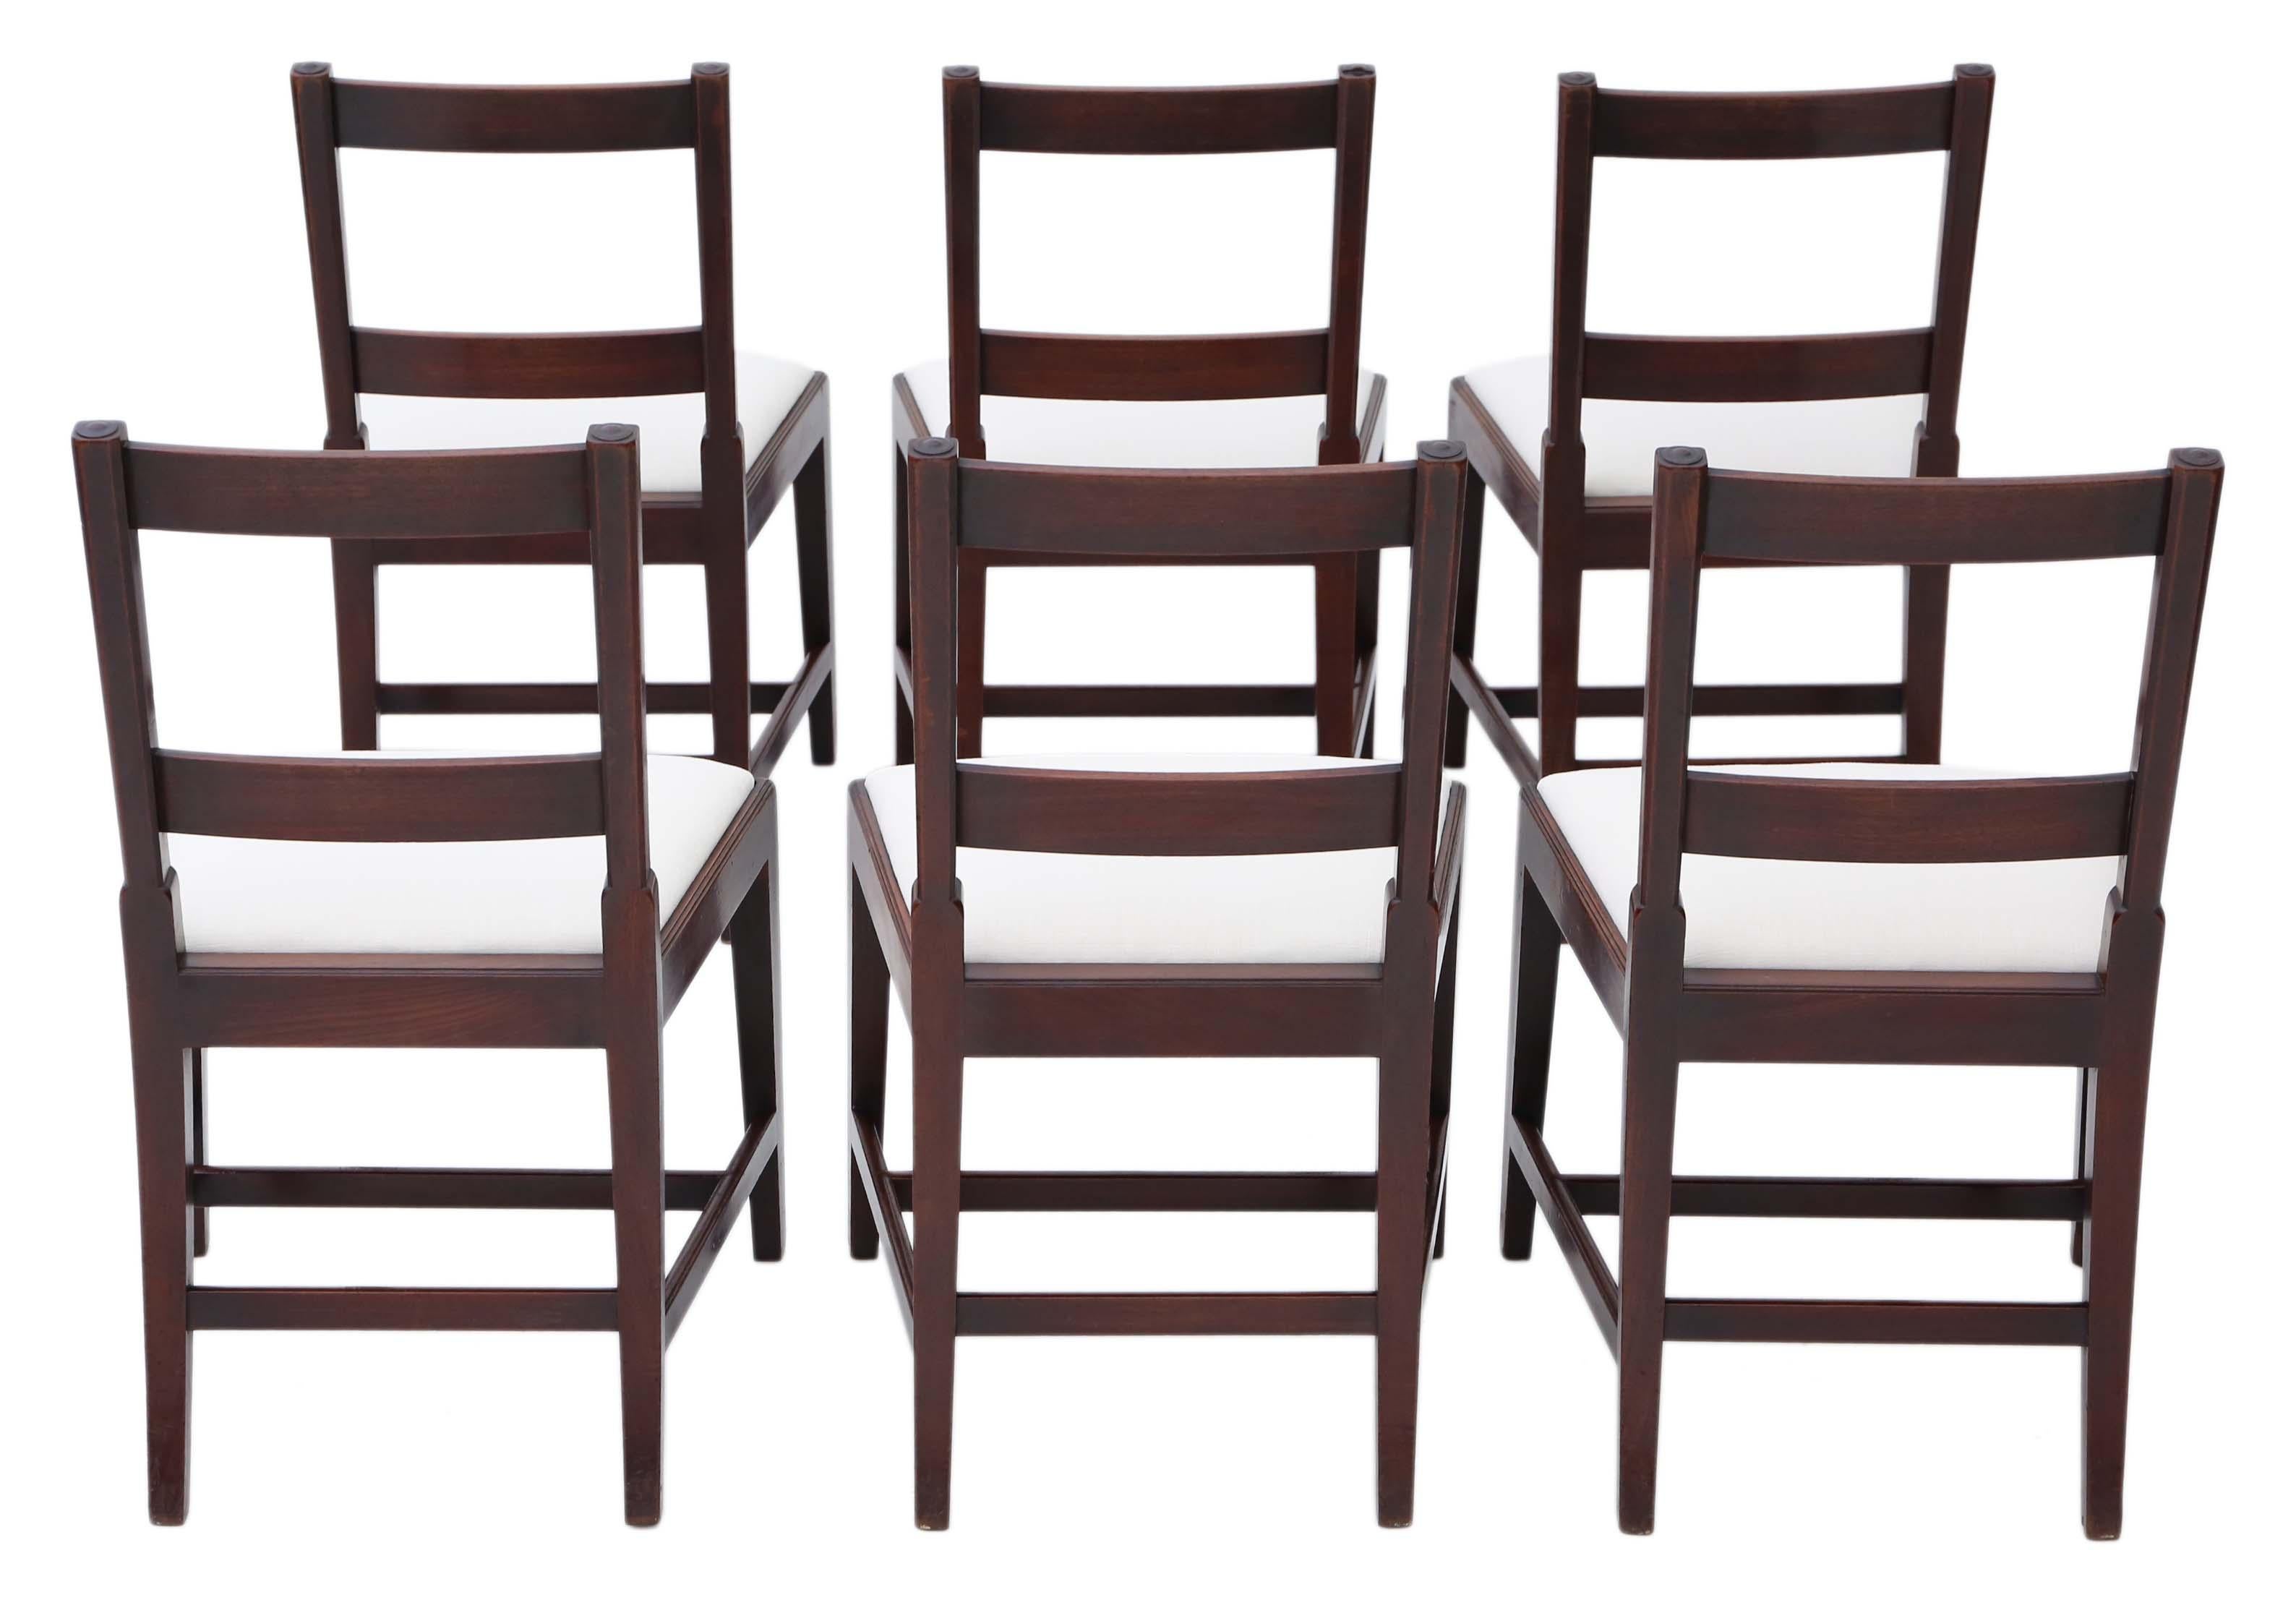 Antique quality set of 6 Georgian mahogany dining chairs 19th century.
Solid with no loose joints. Lovely simple elegant design. 
New upholstery in a heavy weight fabric.
Overall maximum dimensions:
Chair 51cm W x 49cm D x 87cm H (44cm H seat